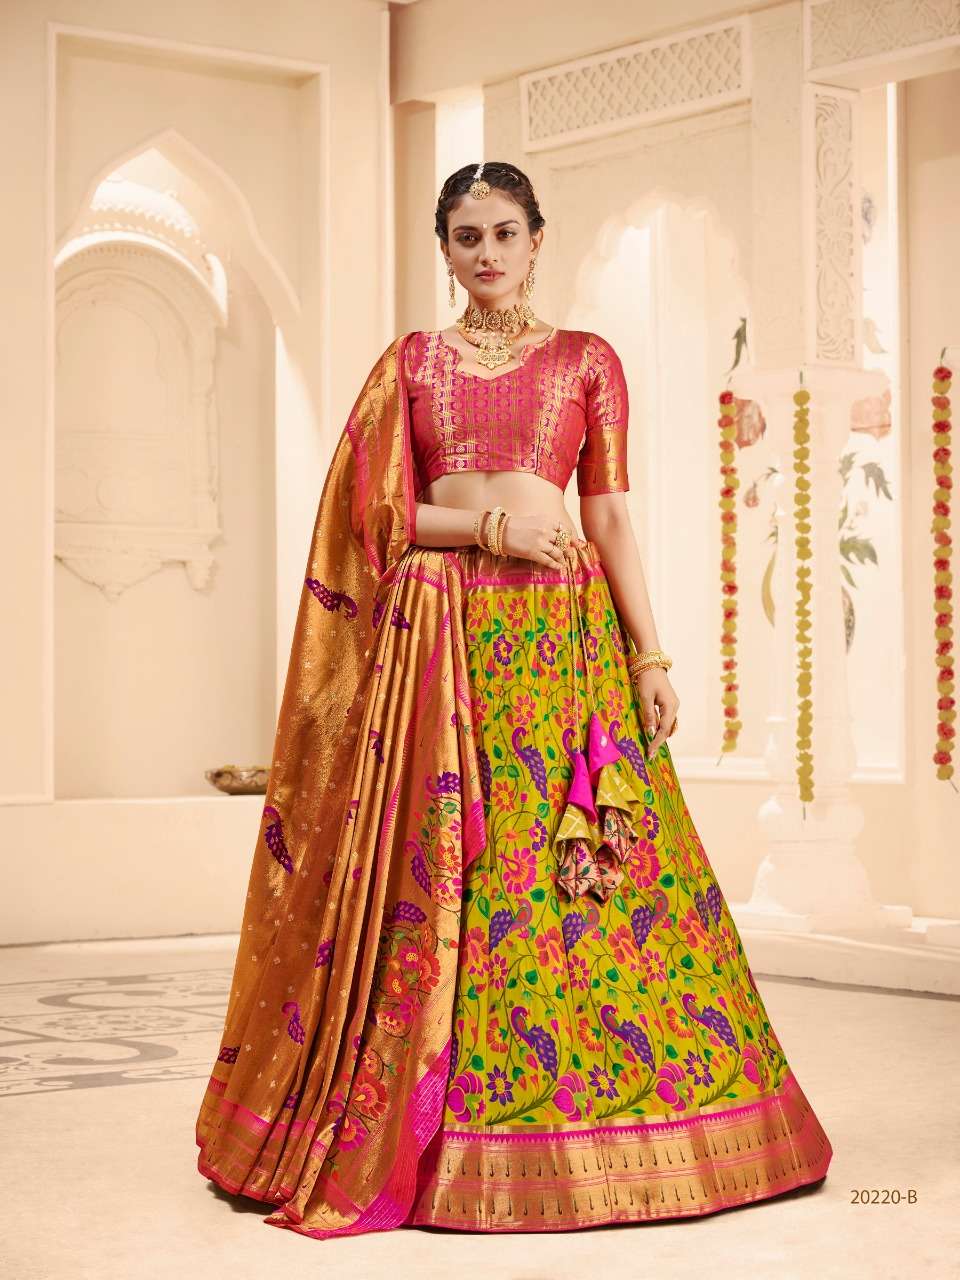 HOT SELLING BEST DESIGNER PARTY WEAR LEHENGA CHOLI IN NET WITH SEQUENCE WORK KBSM 1001-20220 COLOR